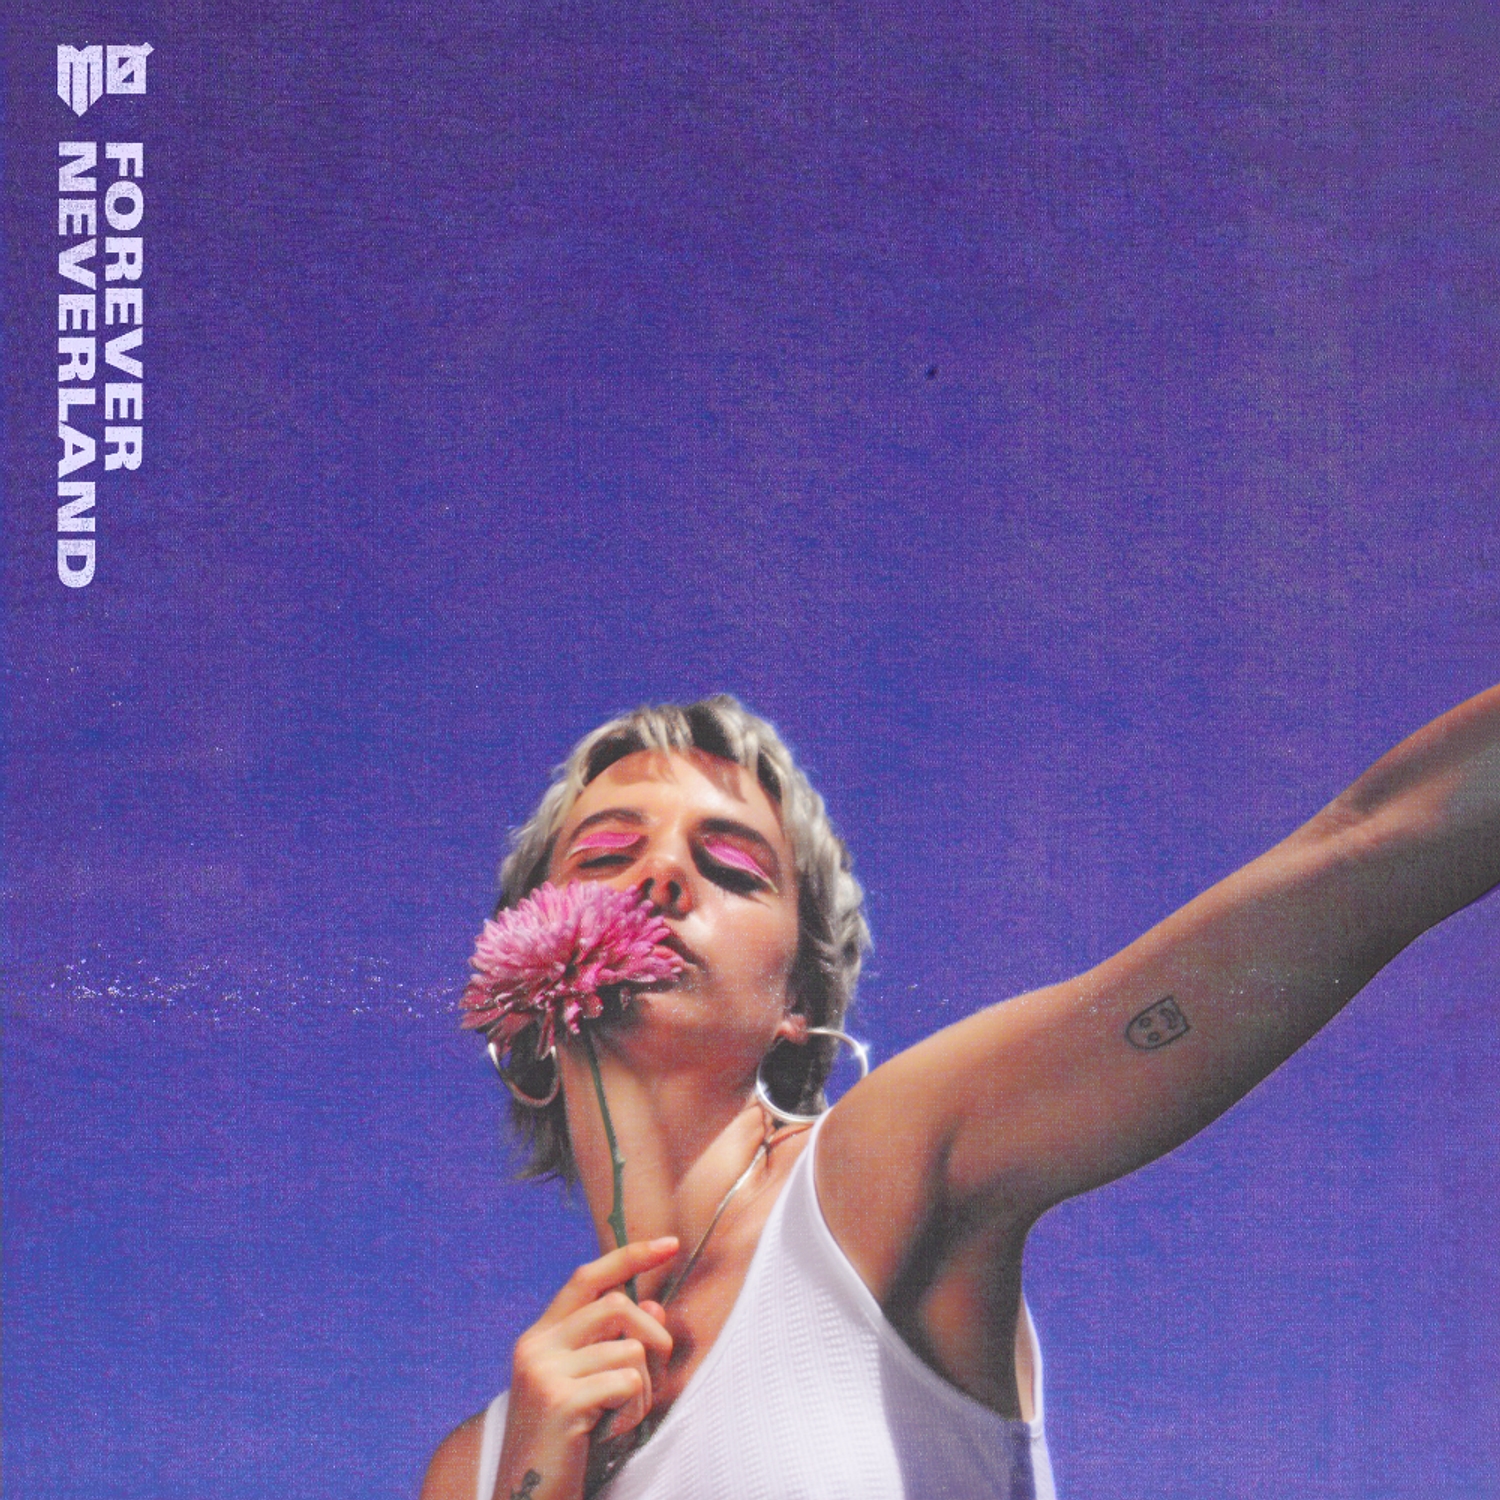 MØ shares new song 'Way Down'